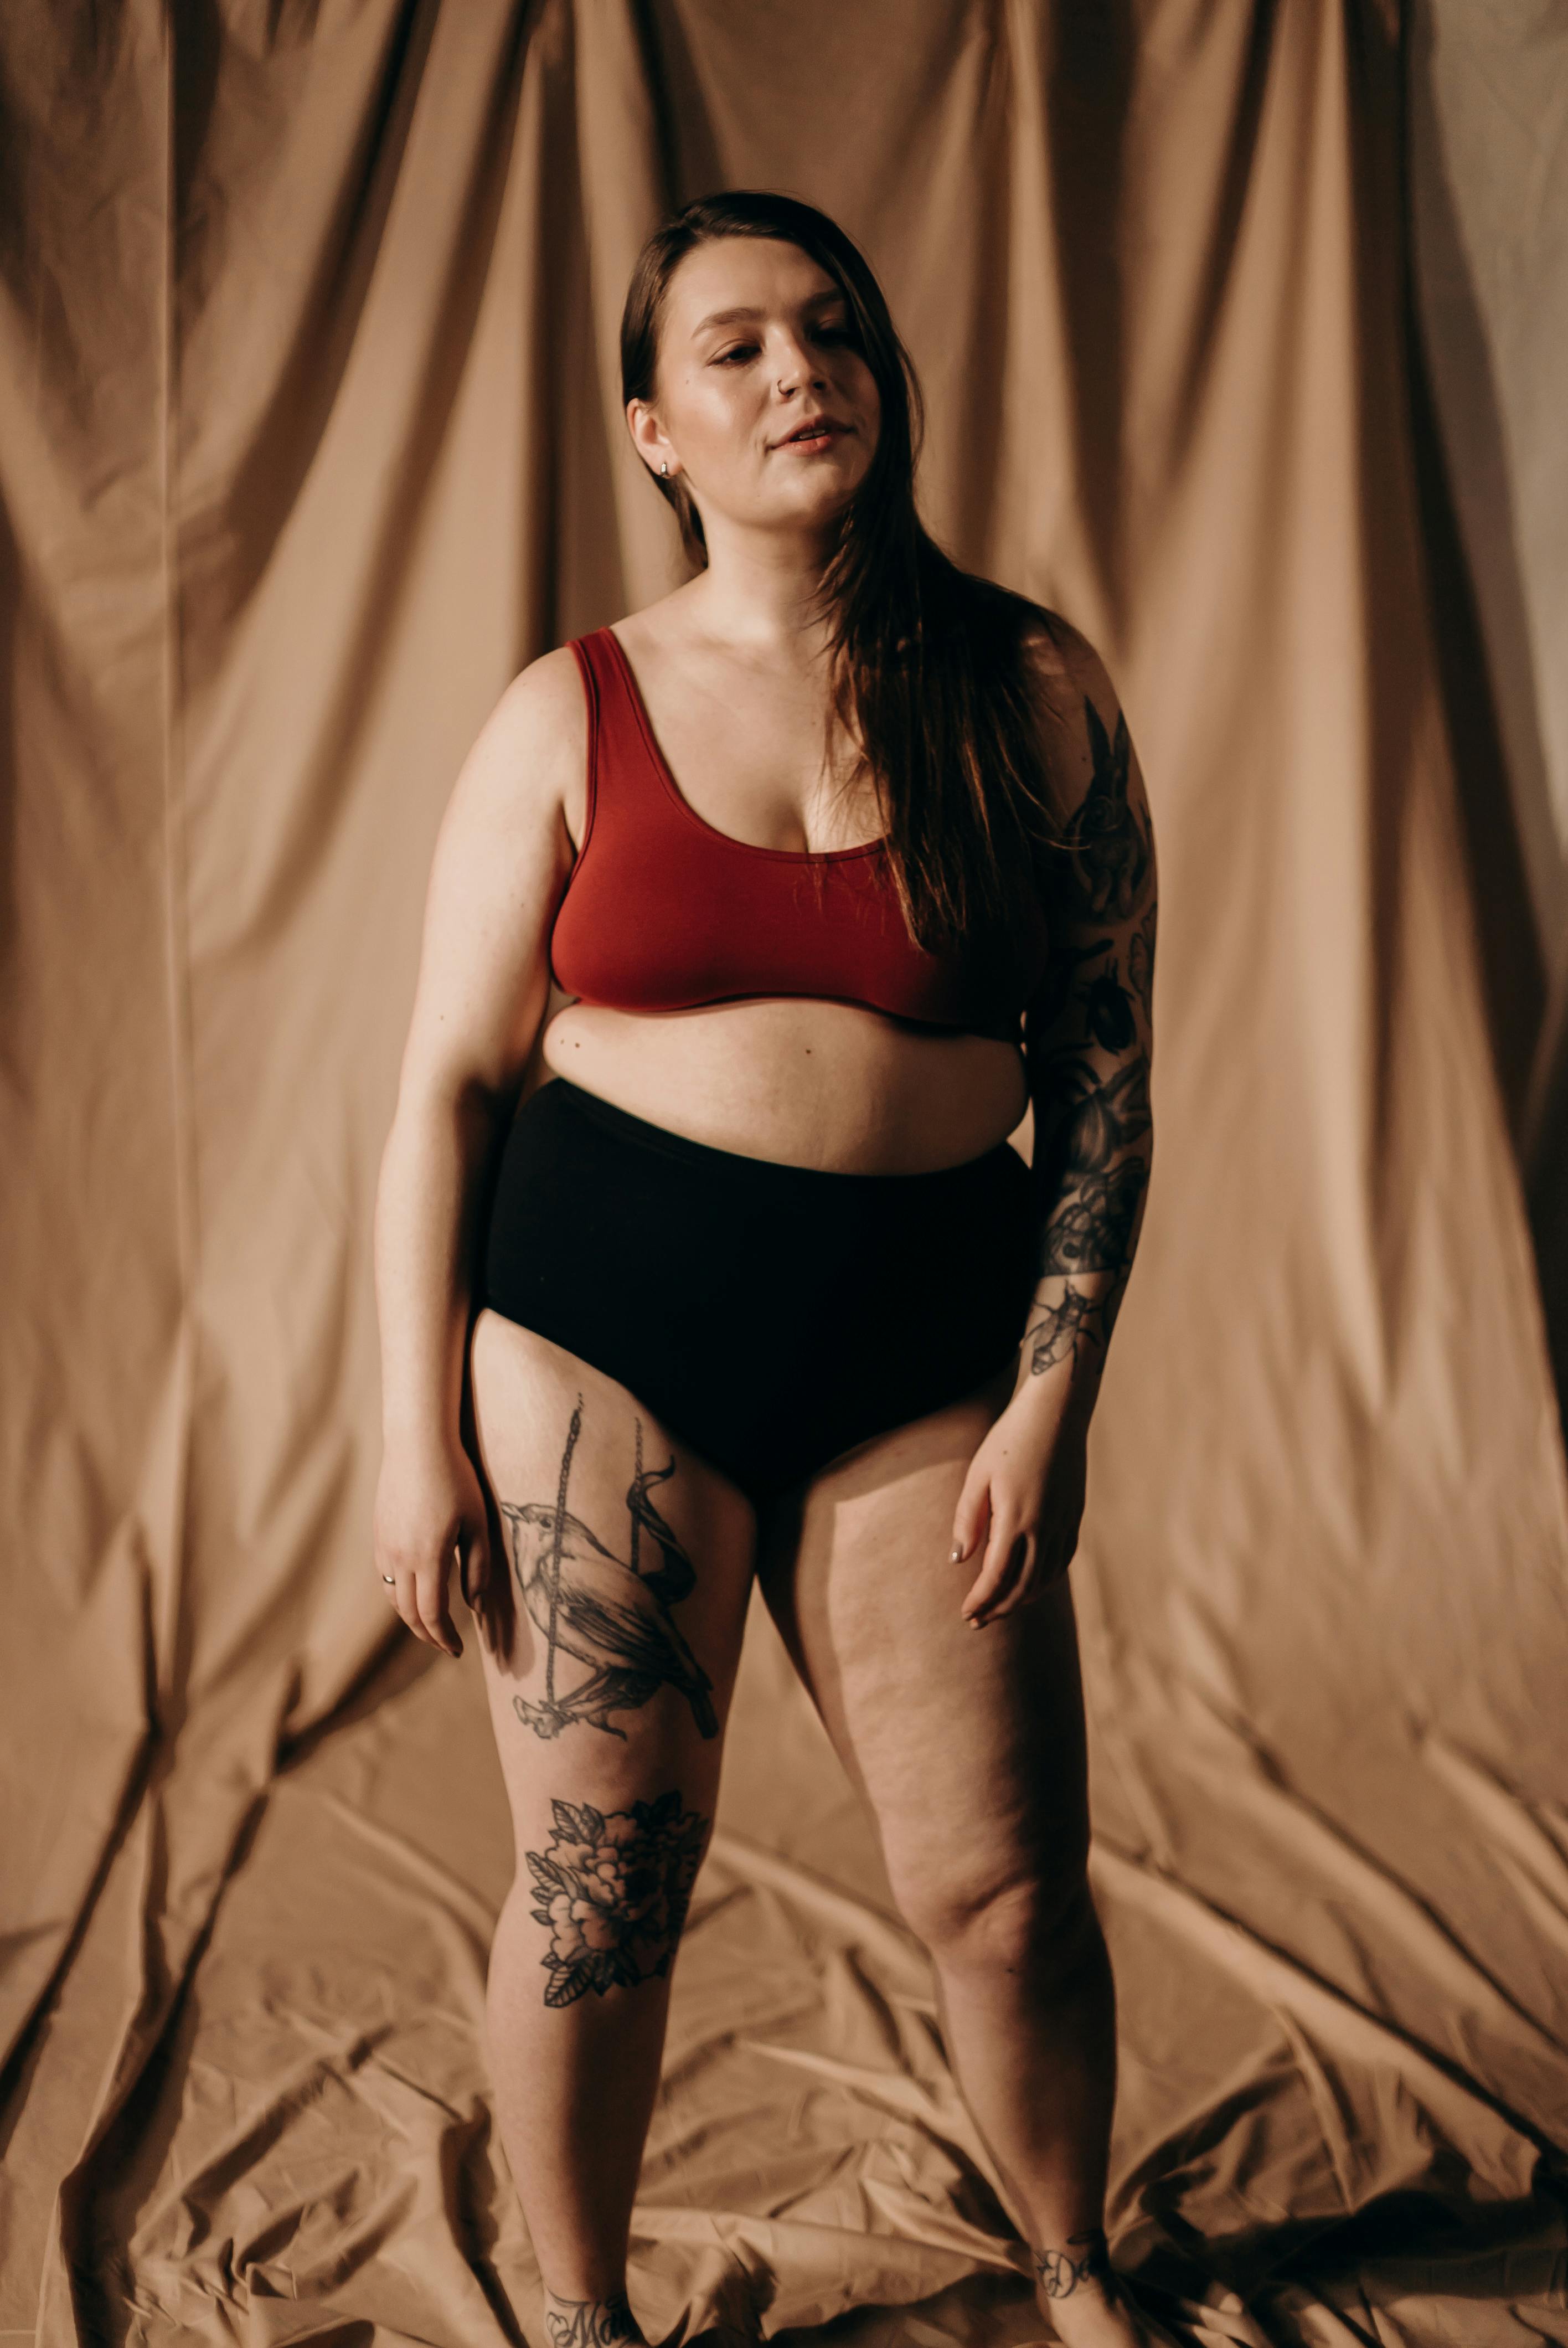 Woman in Red Sports Bra and Black Underwear Standing on Brown Curtain ·  Free Stock Photo